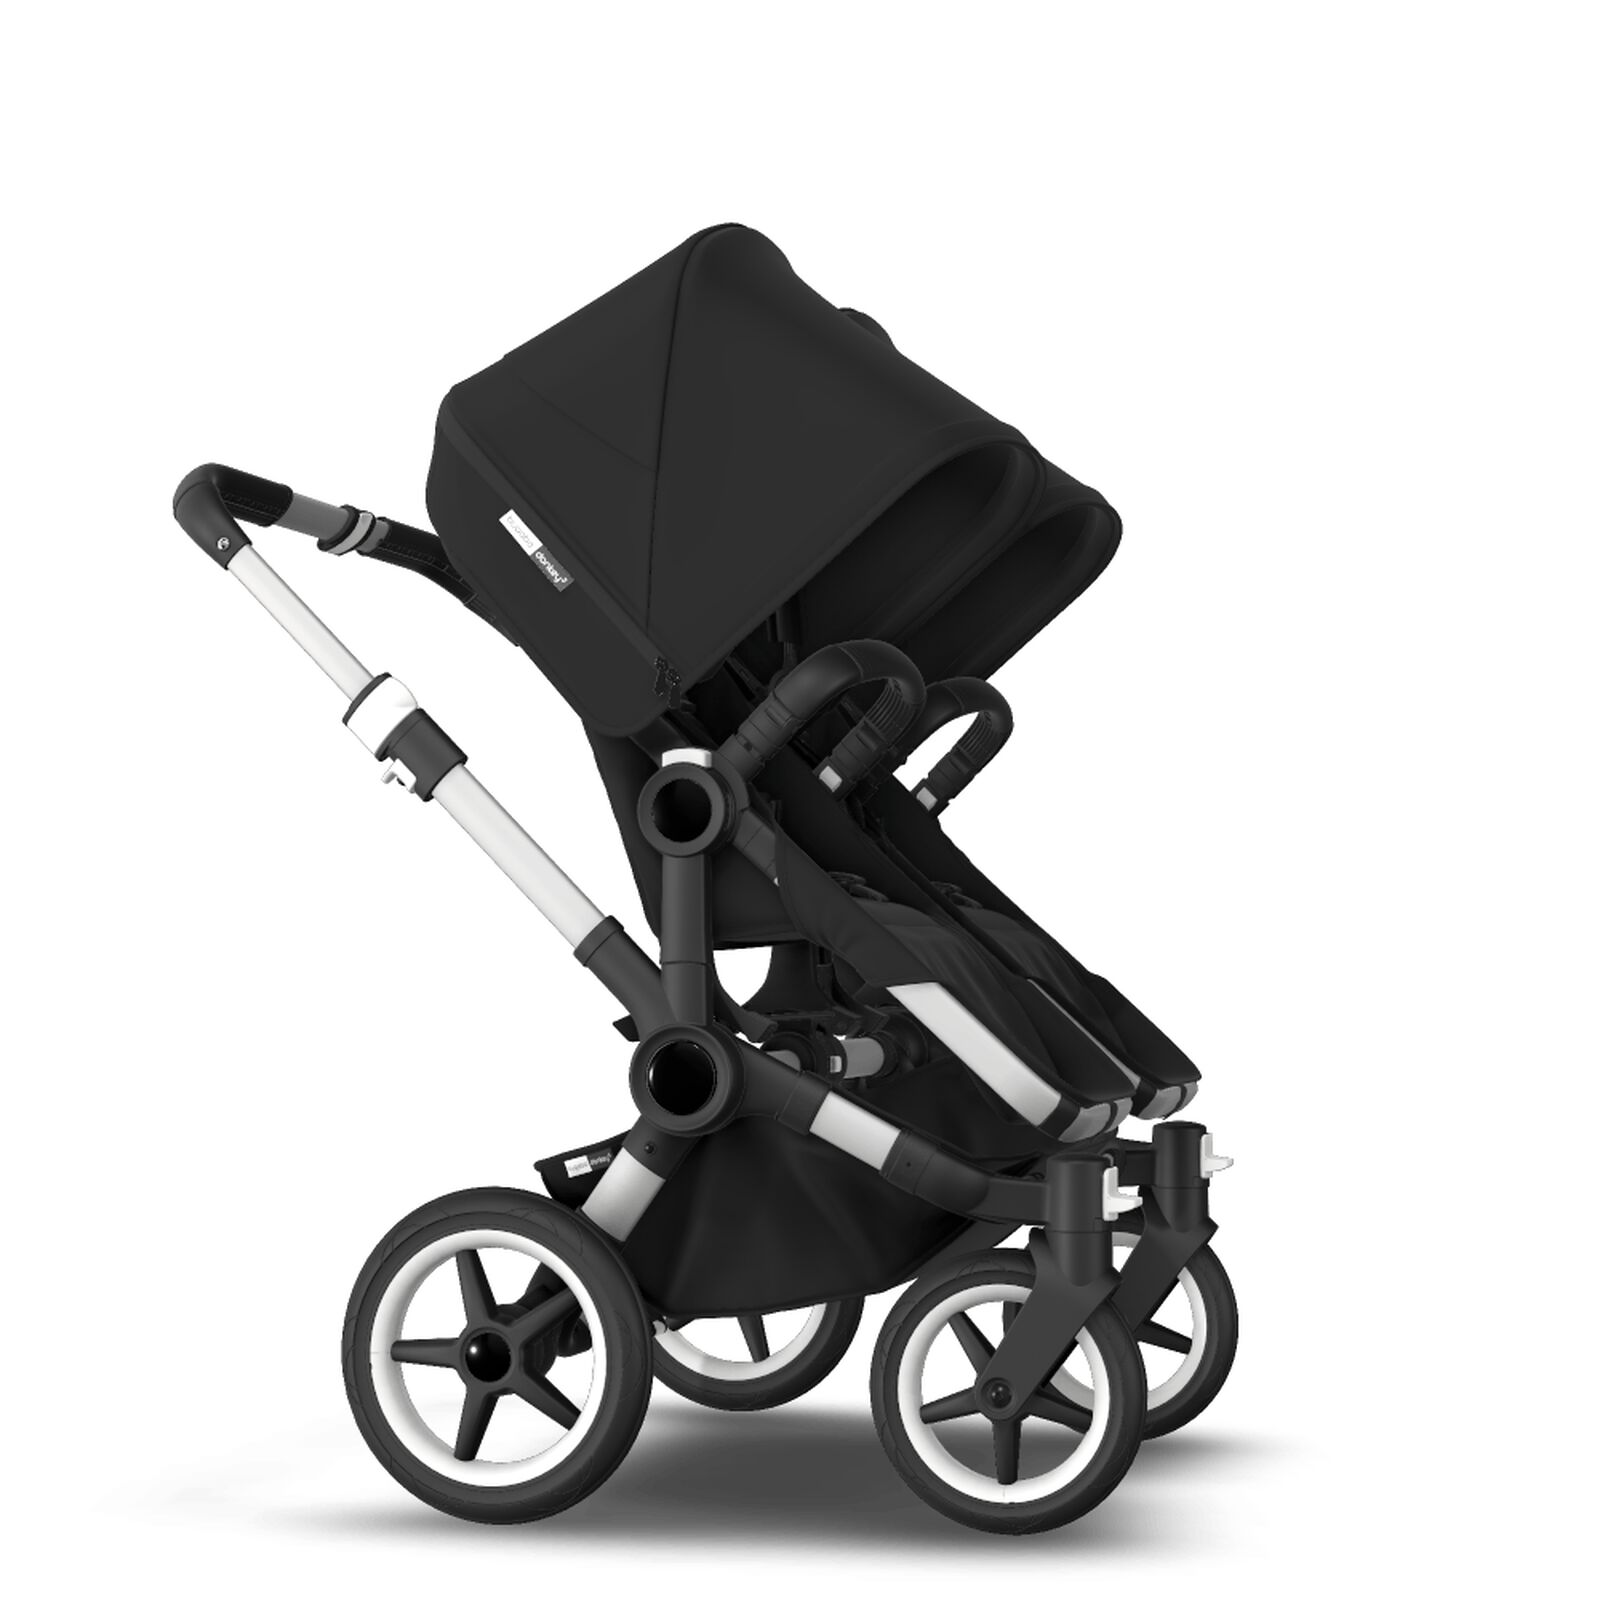 Bugaboo Donkey 3 Twin travel system - View 13